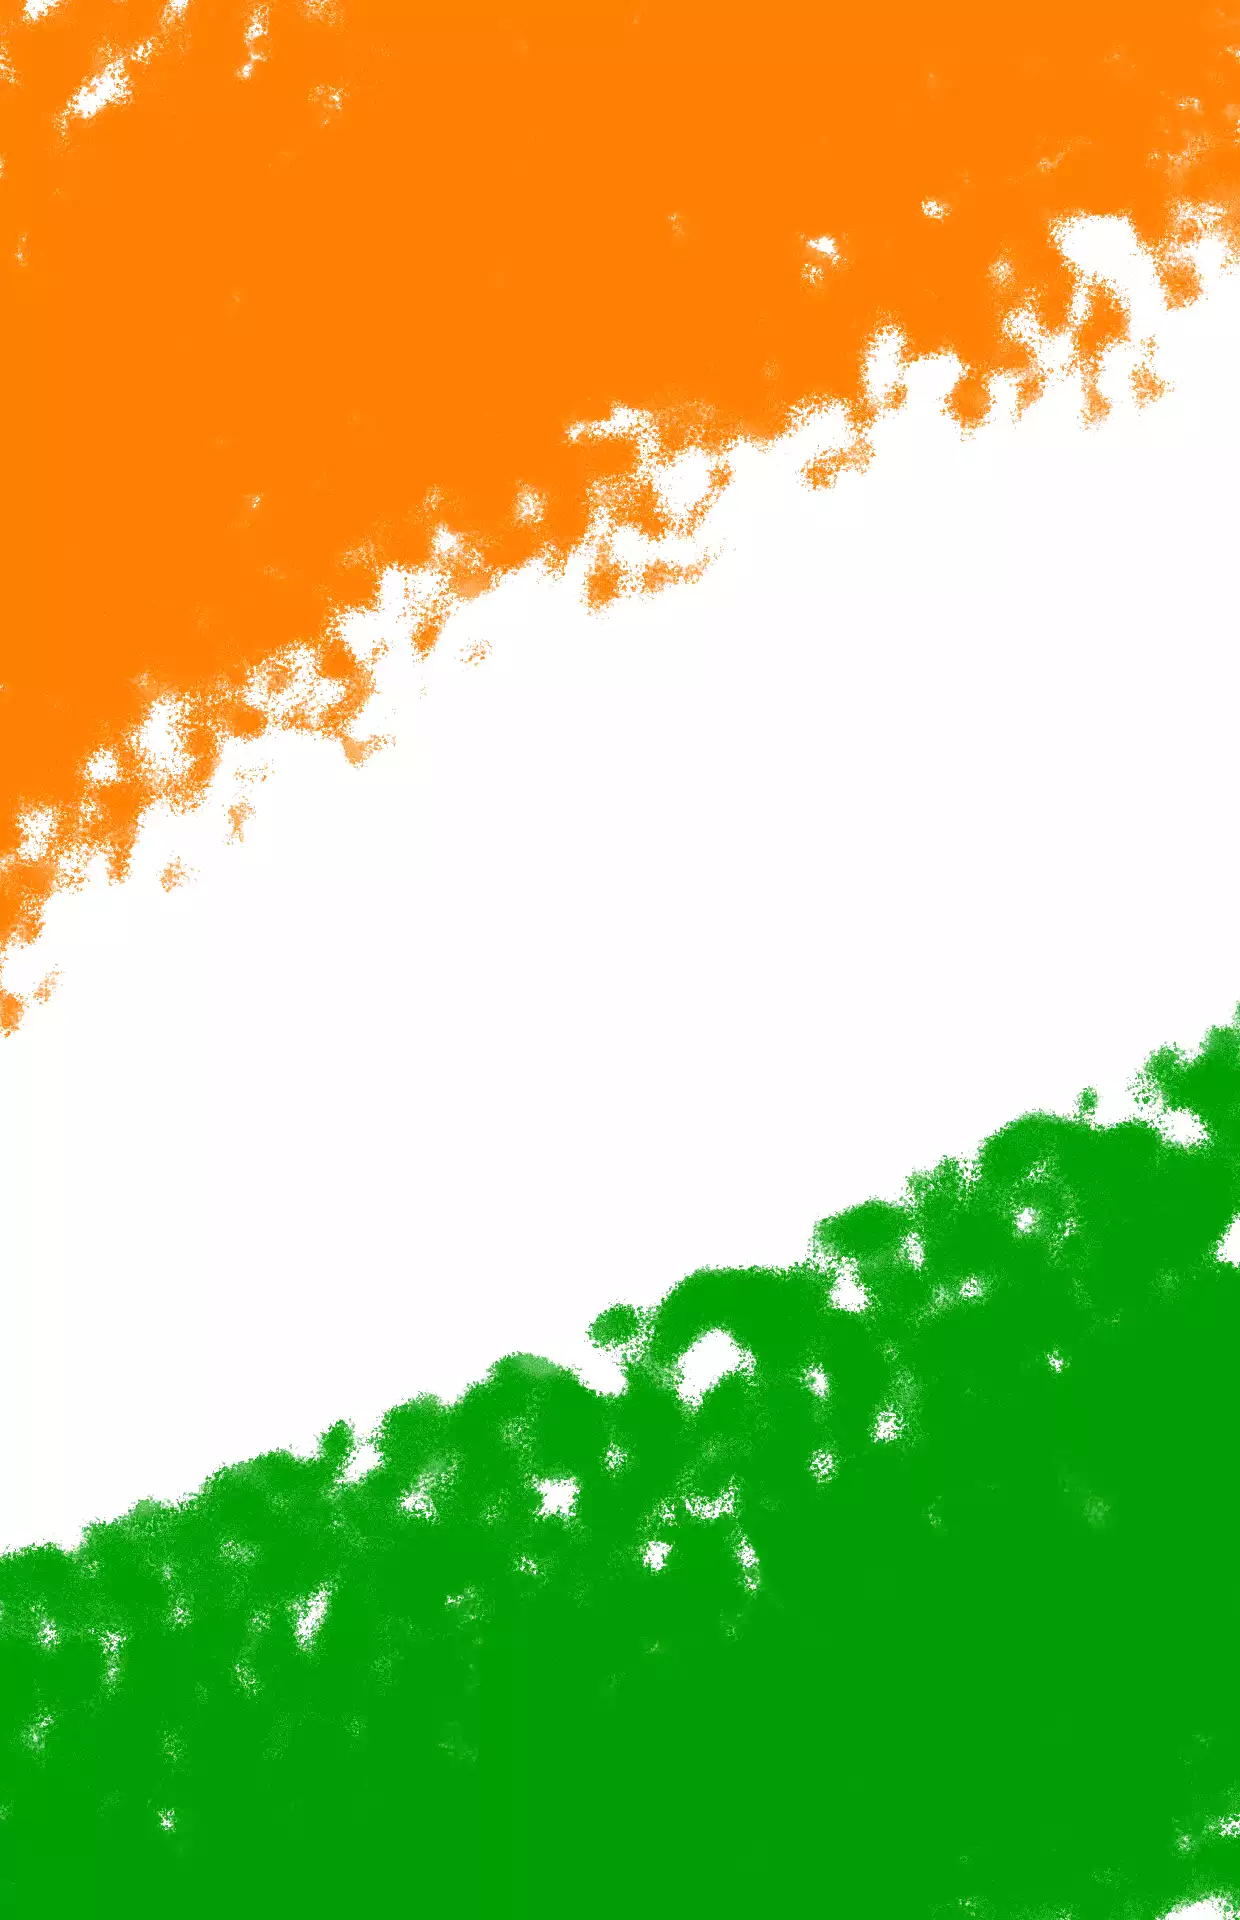 Indian flag background download free